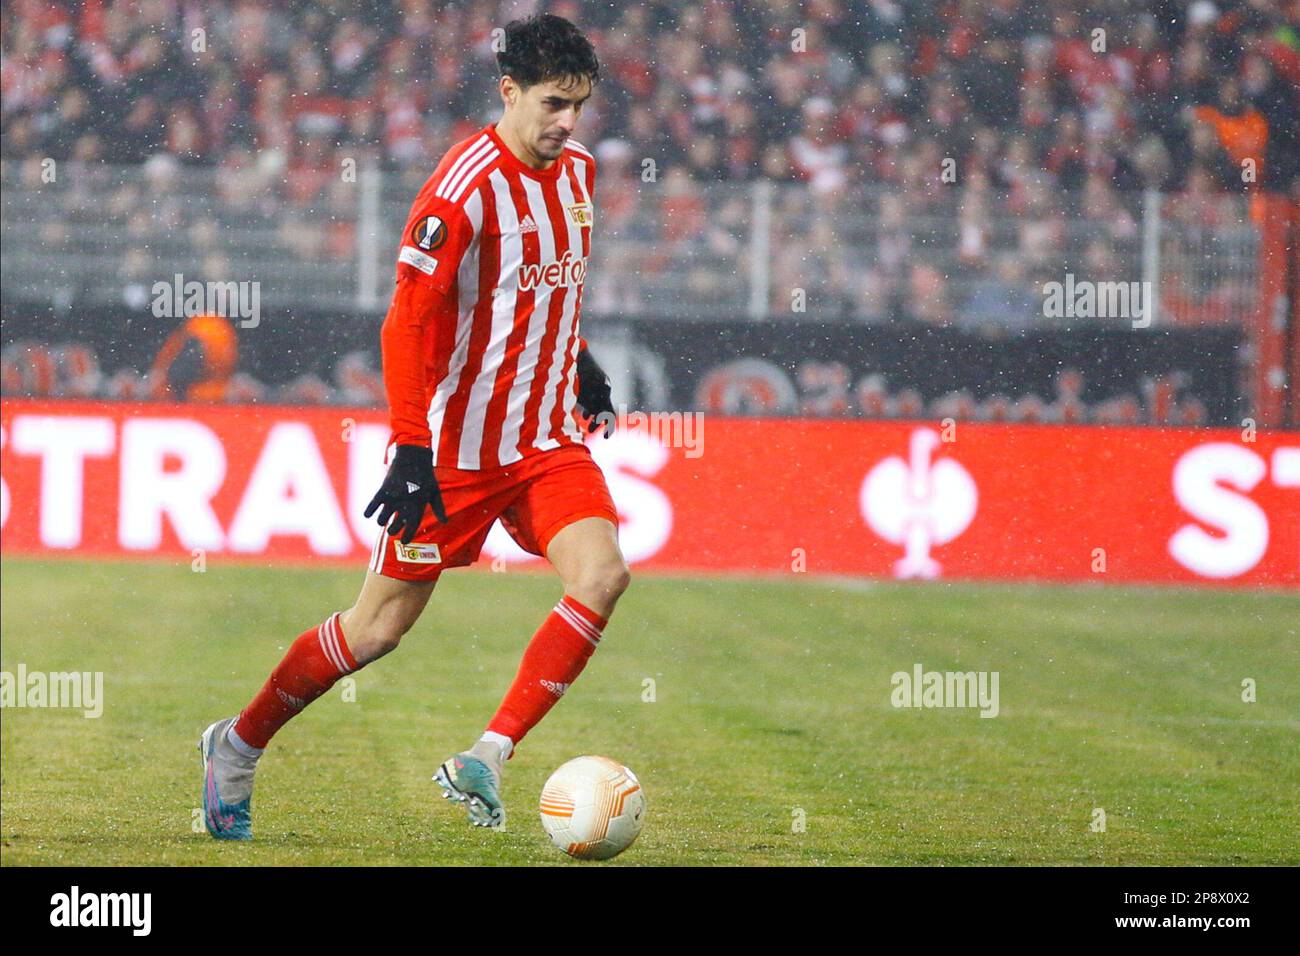 Berlin, Germany, 9 March, 2023. Diogo Filipe Monteiro Pinto Leite from 1. FC Union Berlin in action during the match between 1. FC Union Berlin Vs. Union Saint-Gilloise, round of sixteen, UEFA Europa League 2022/23, Stadion An der Alten Försterei, Berlin, Germany, 9 March, 2023. Iñaki Esnaola Stock Photo